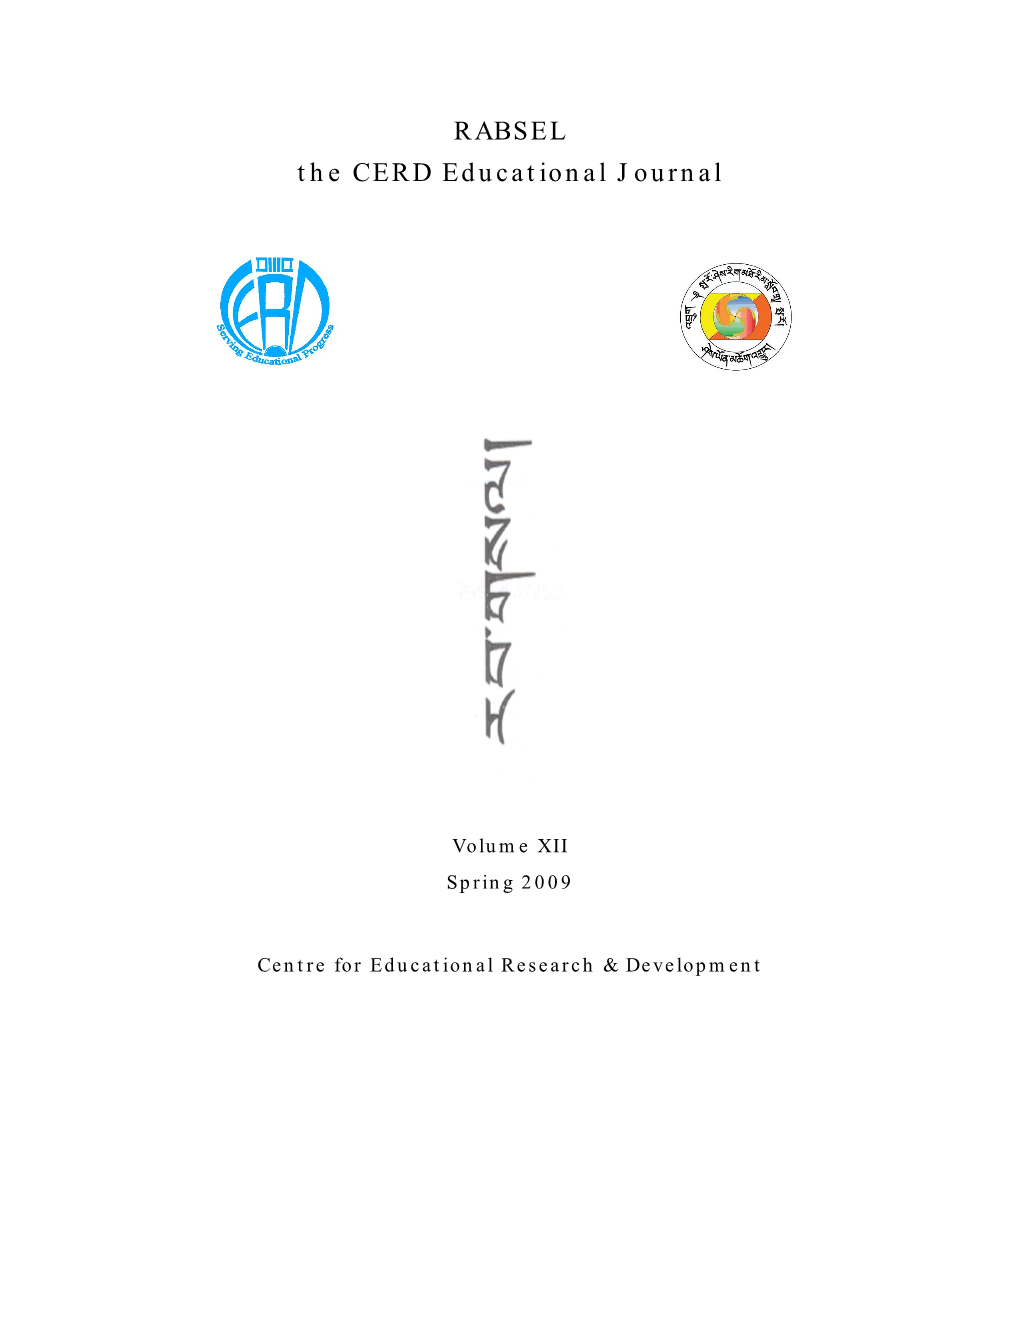 RABSEL the CERD Educational Journal